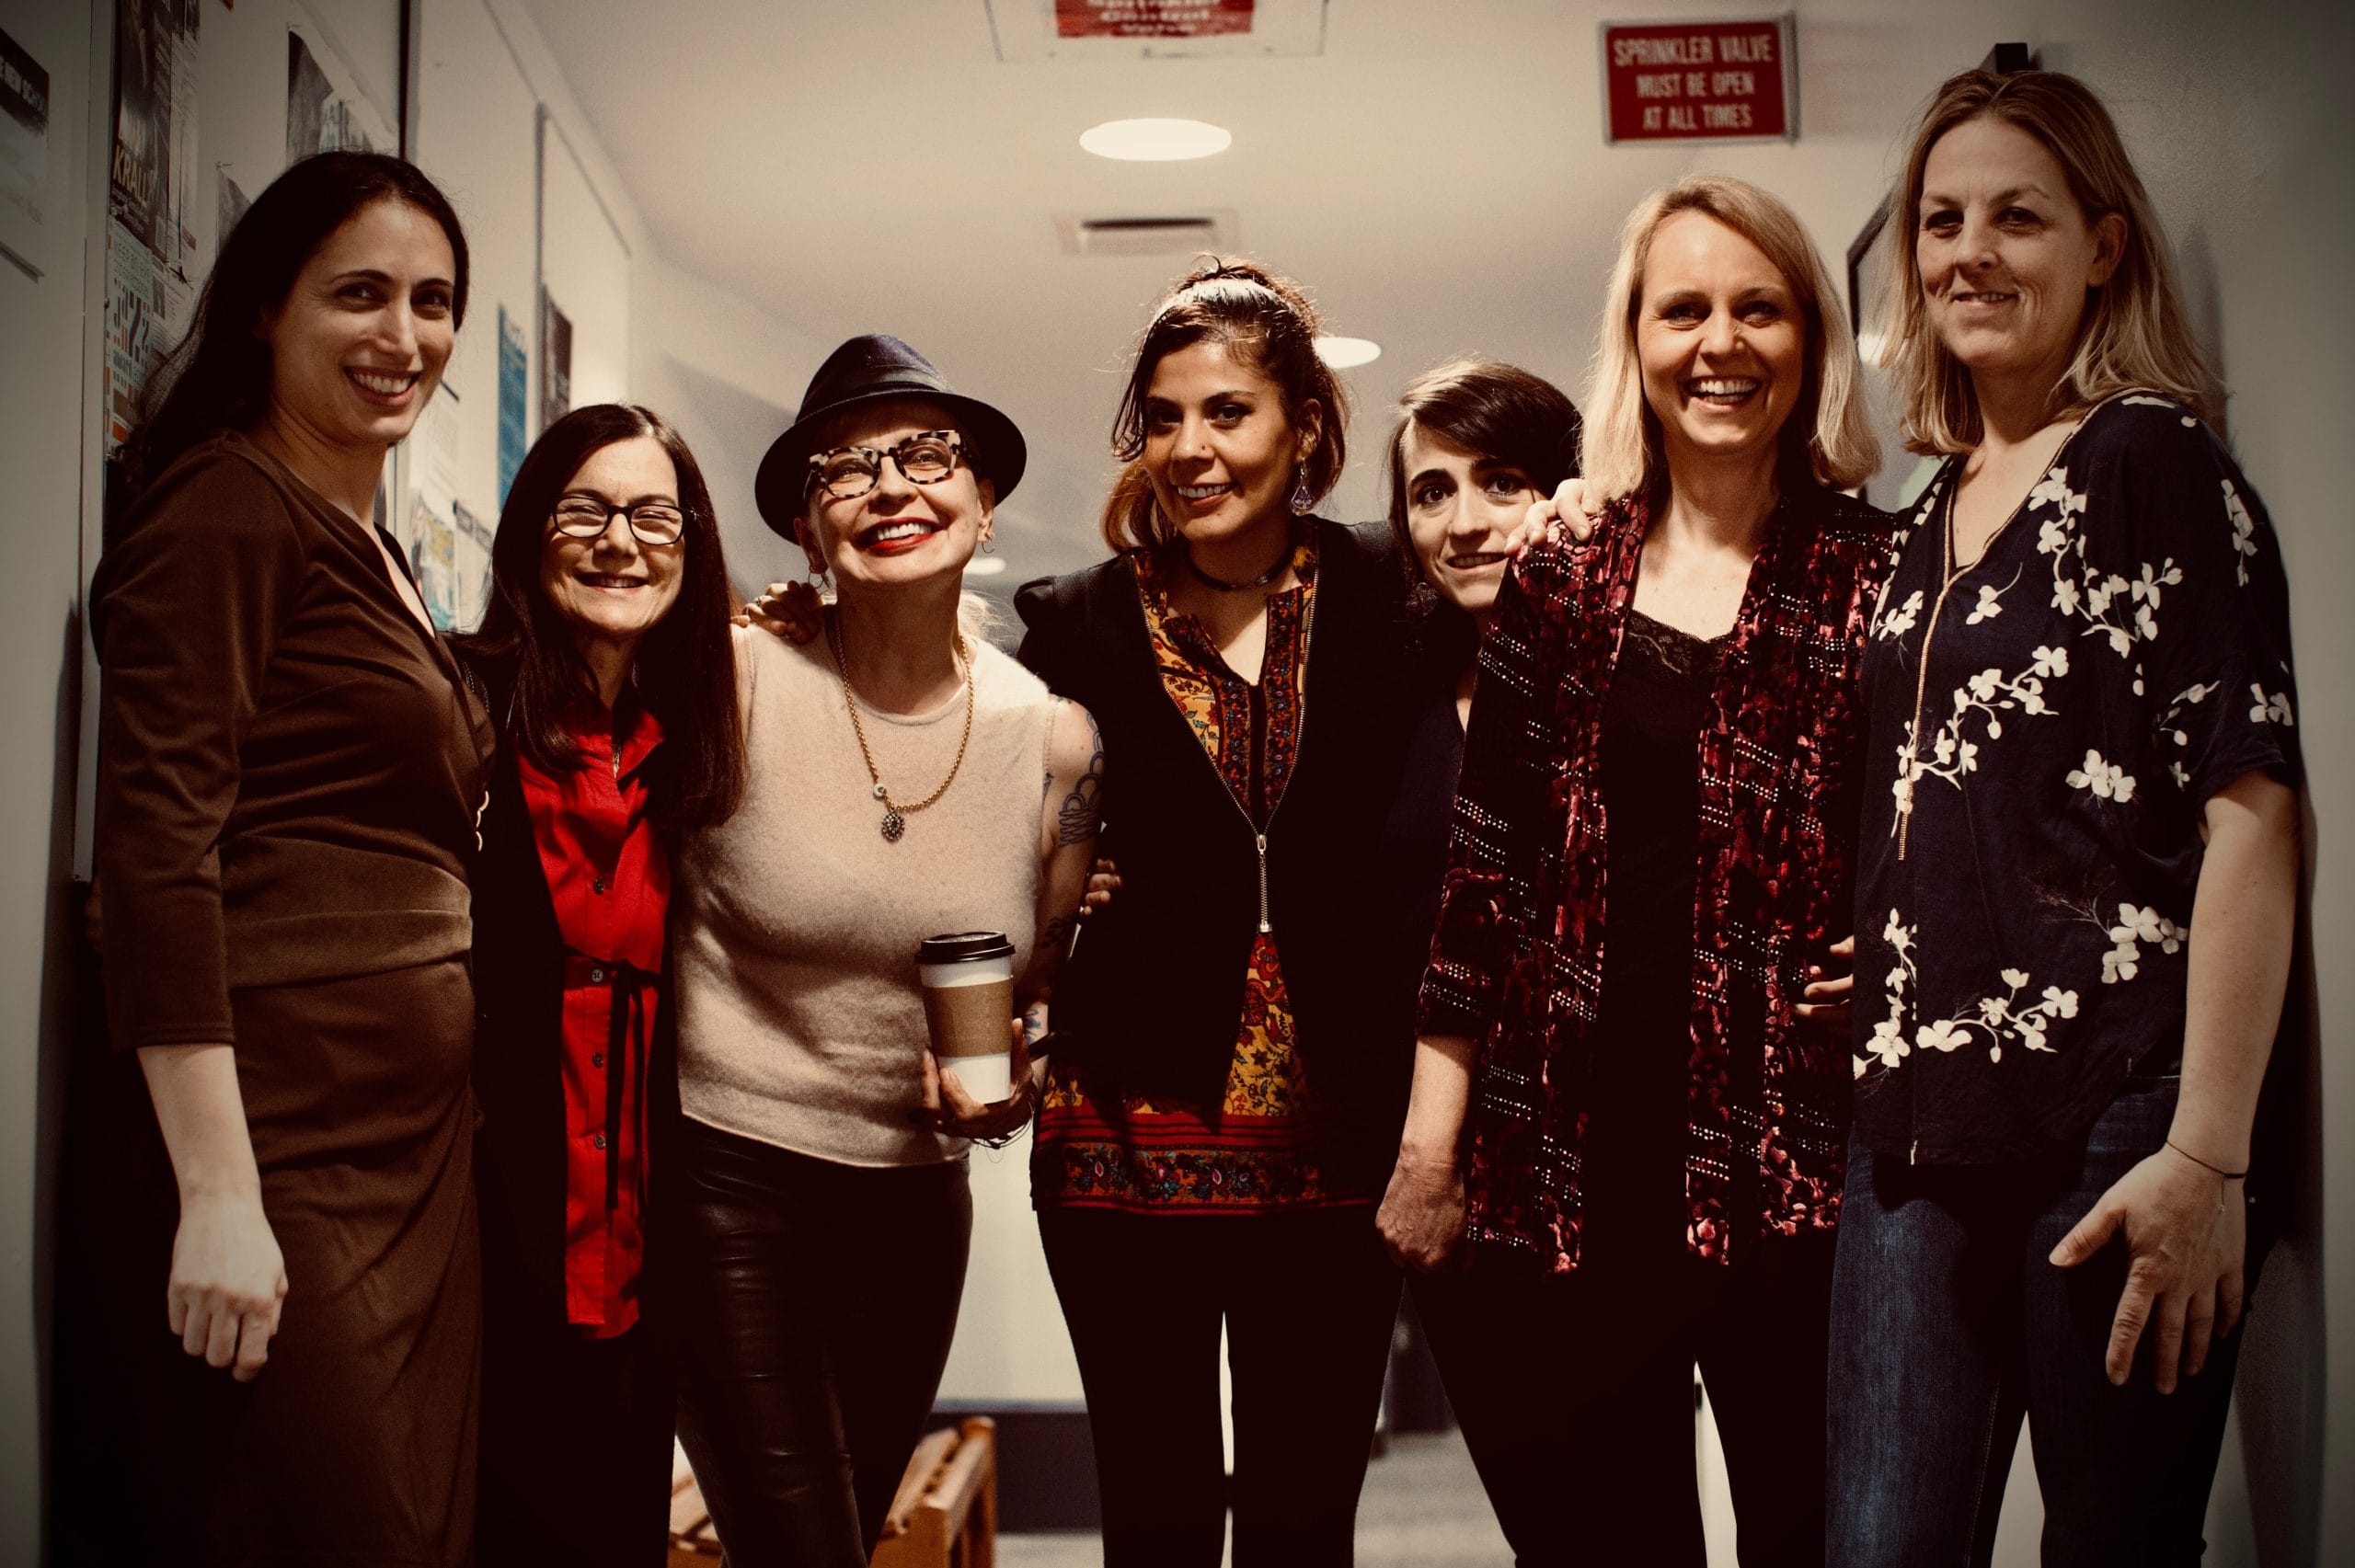 Group of women musicians standing together smiling.